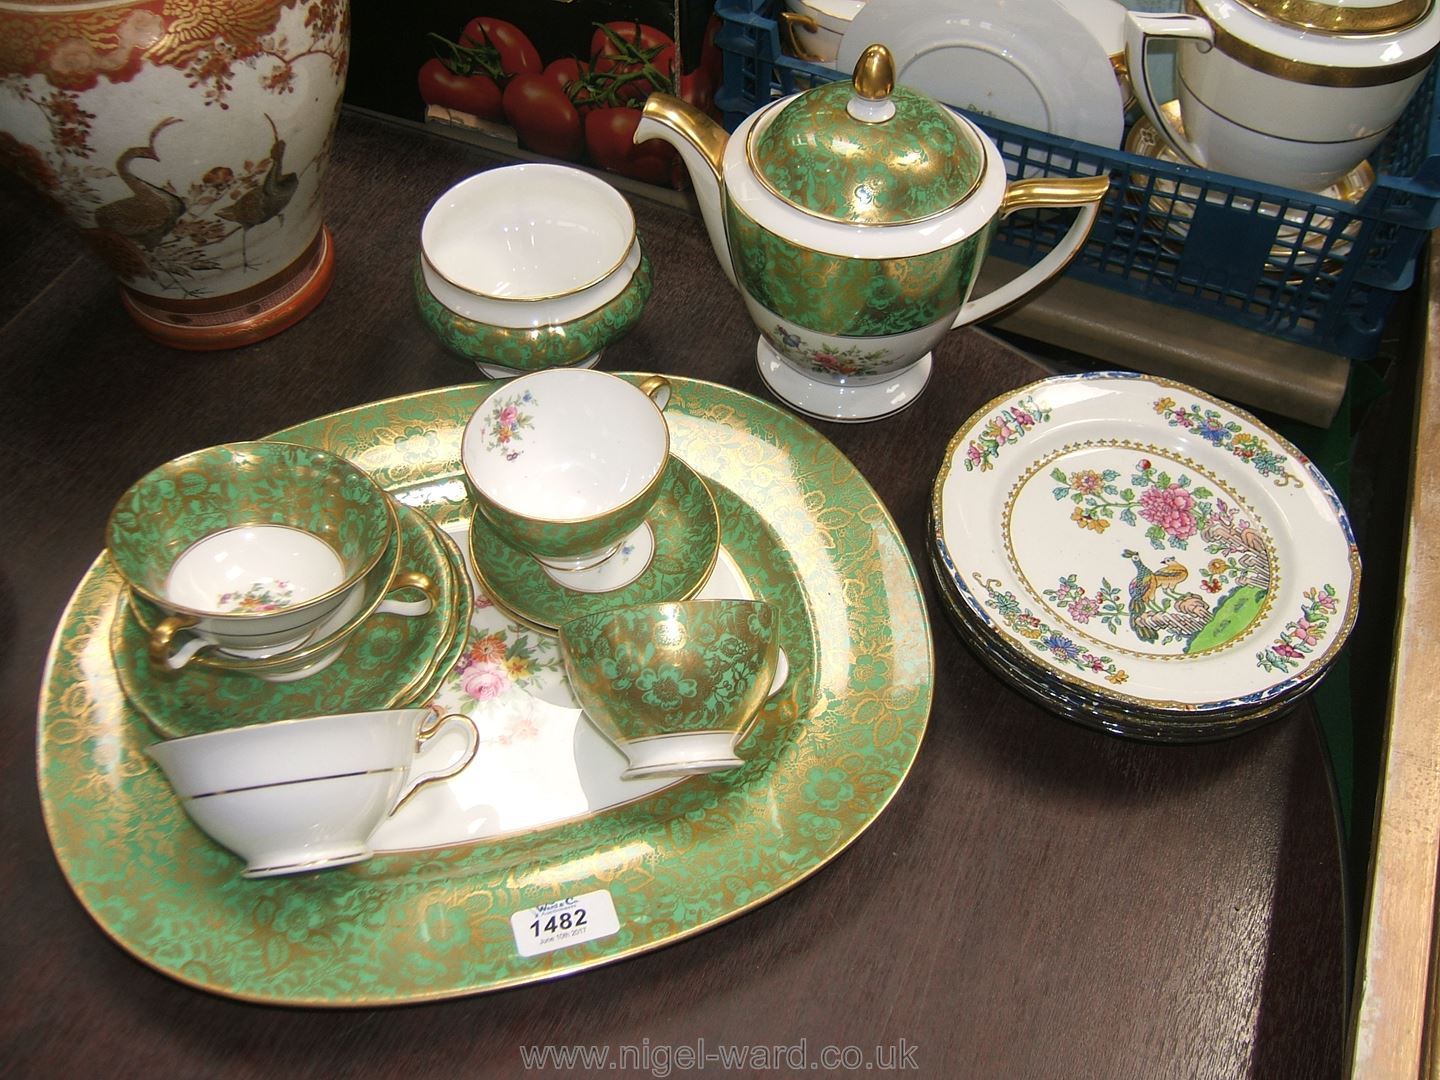 A quantity of Minton 'Brocade' china including teapot, cups and saucers, sugar bowl and meat plate,